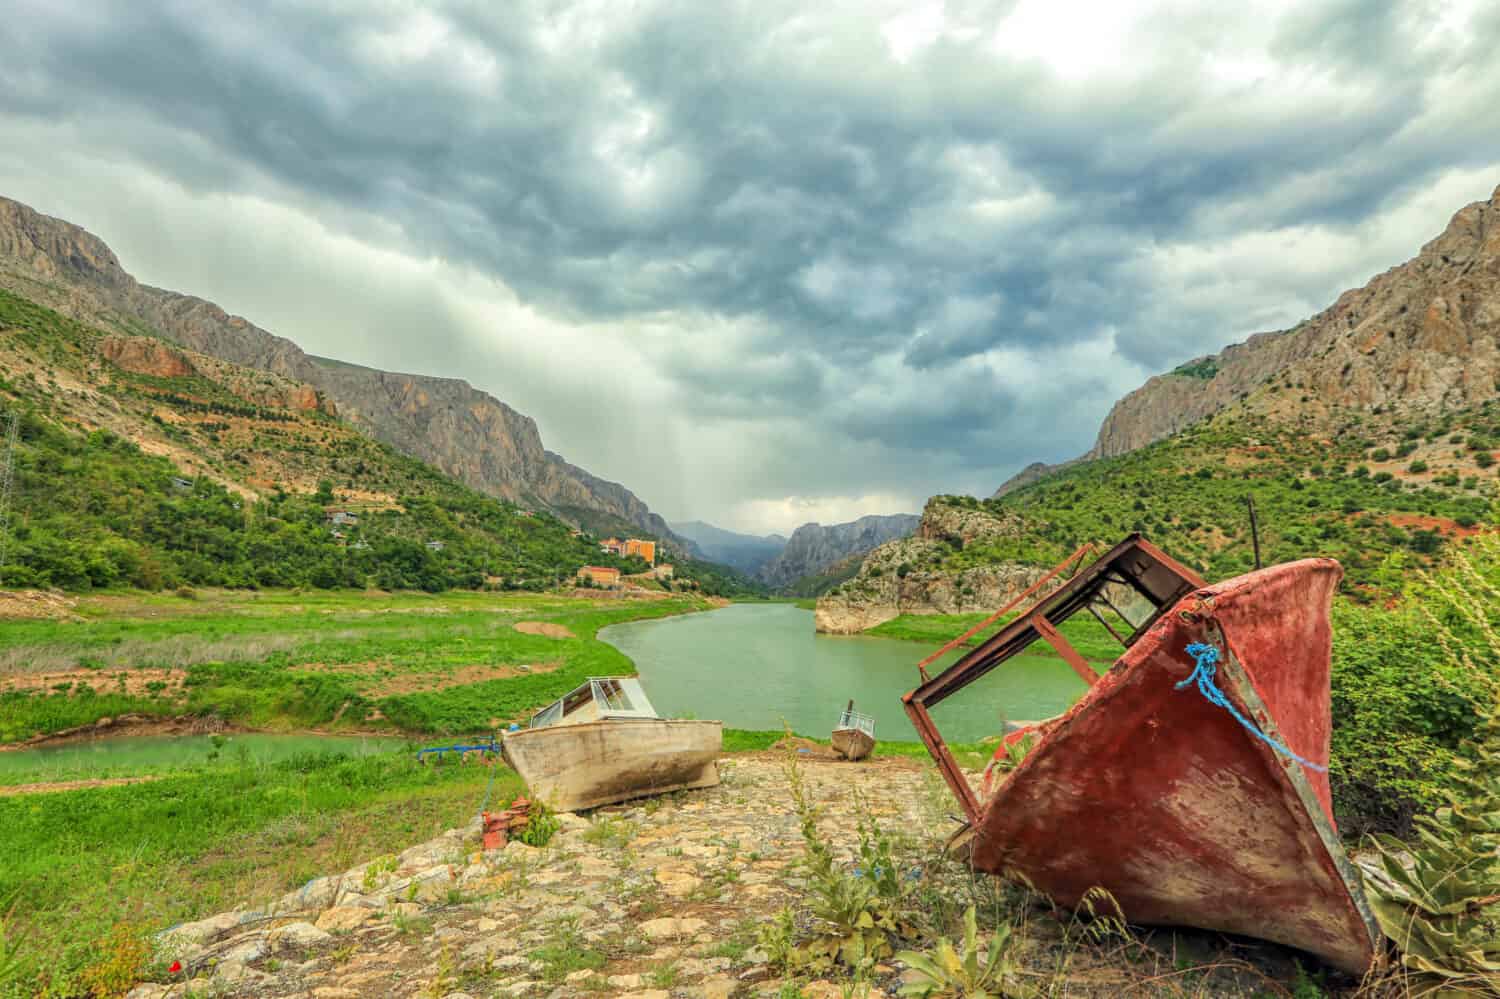 Landscape of The Euphrates River with fishing boats in Kemaliye, Erzincan, Turkey. ( Turkish: Firat Nehri ). The Euphrates receives most of its water in the form of rainfall and melting snow.